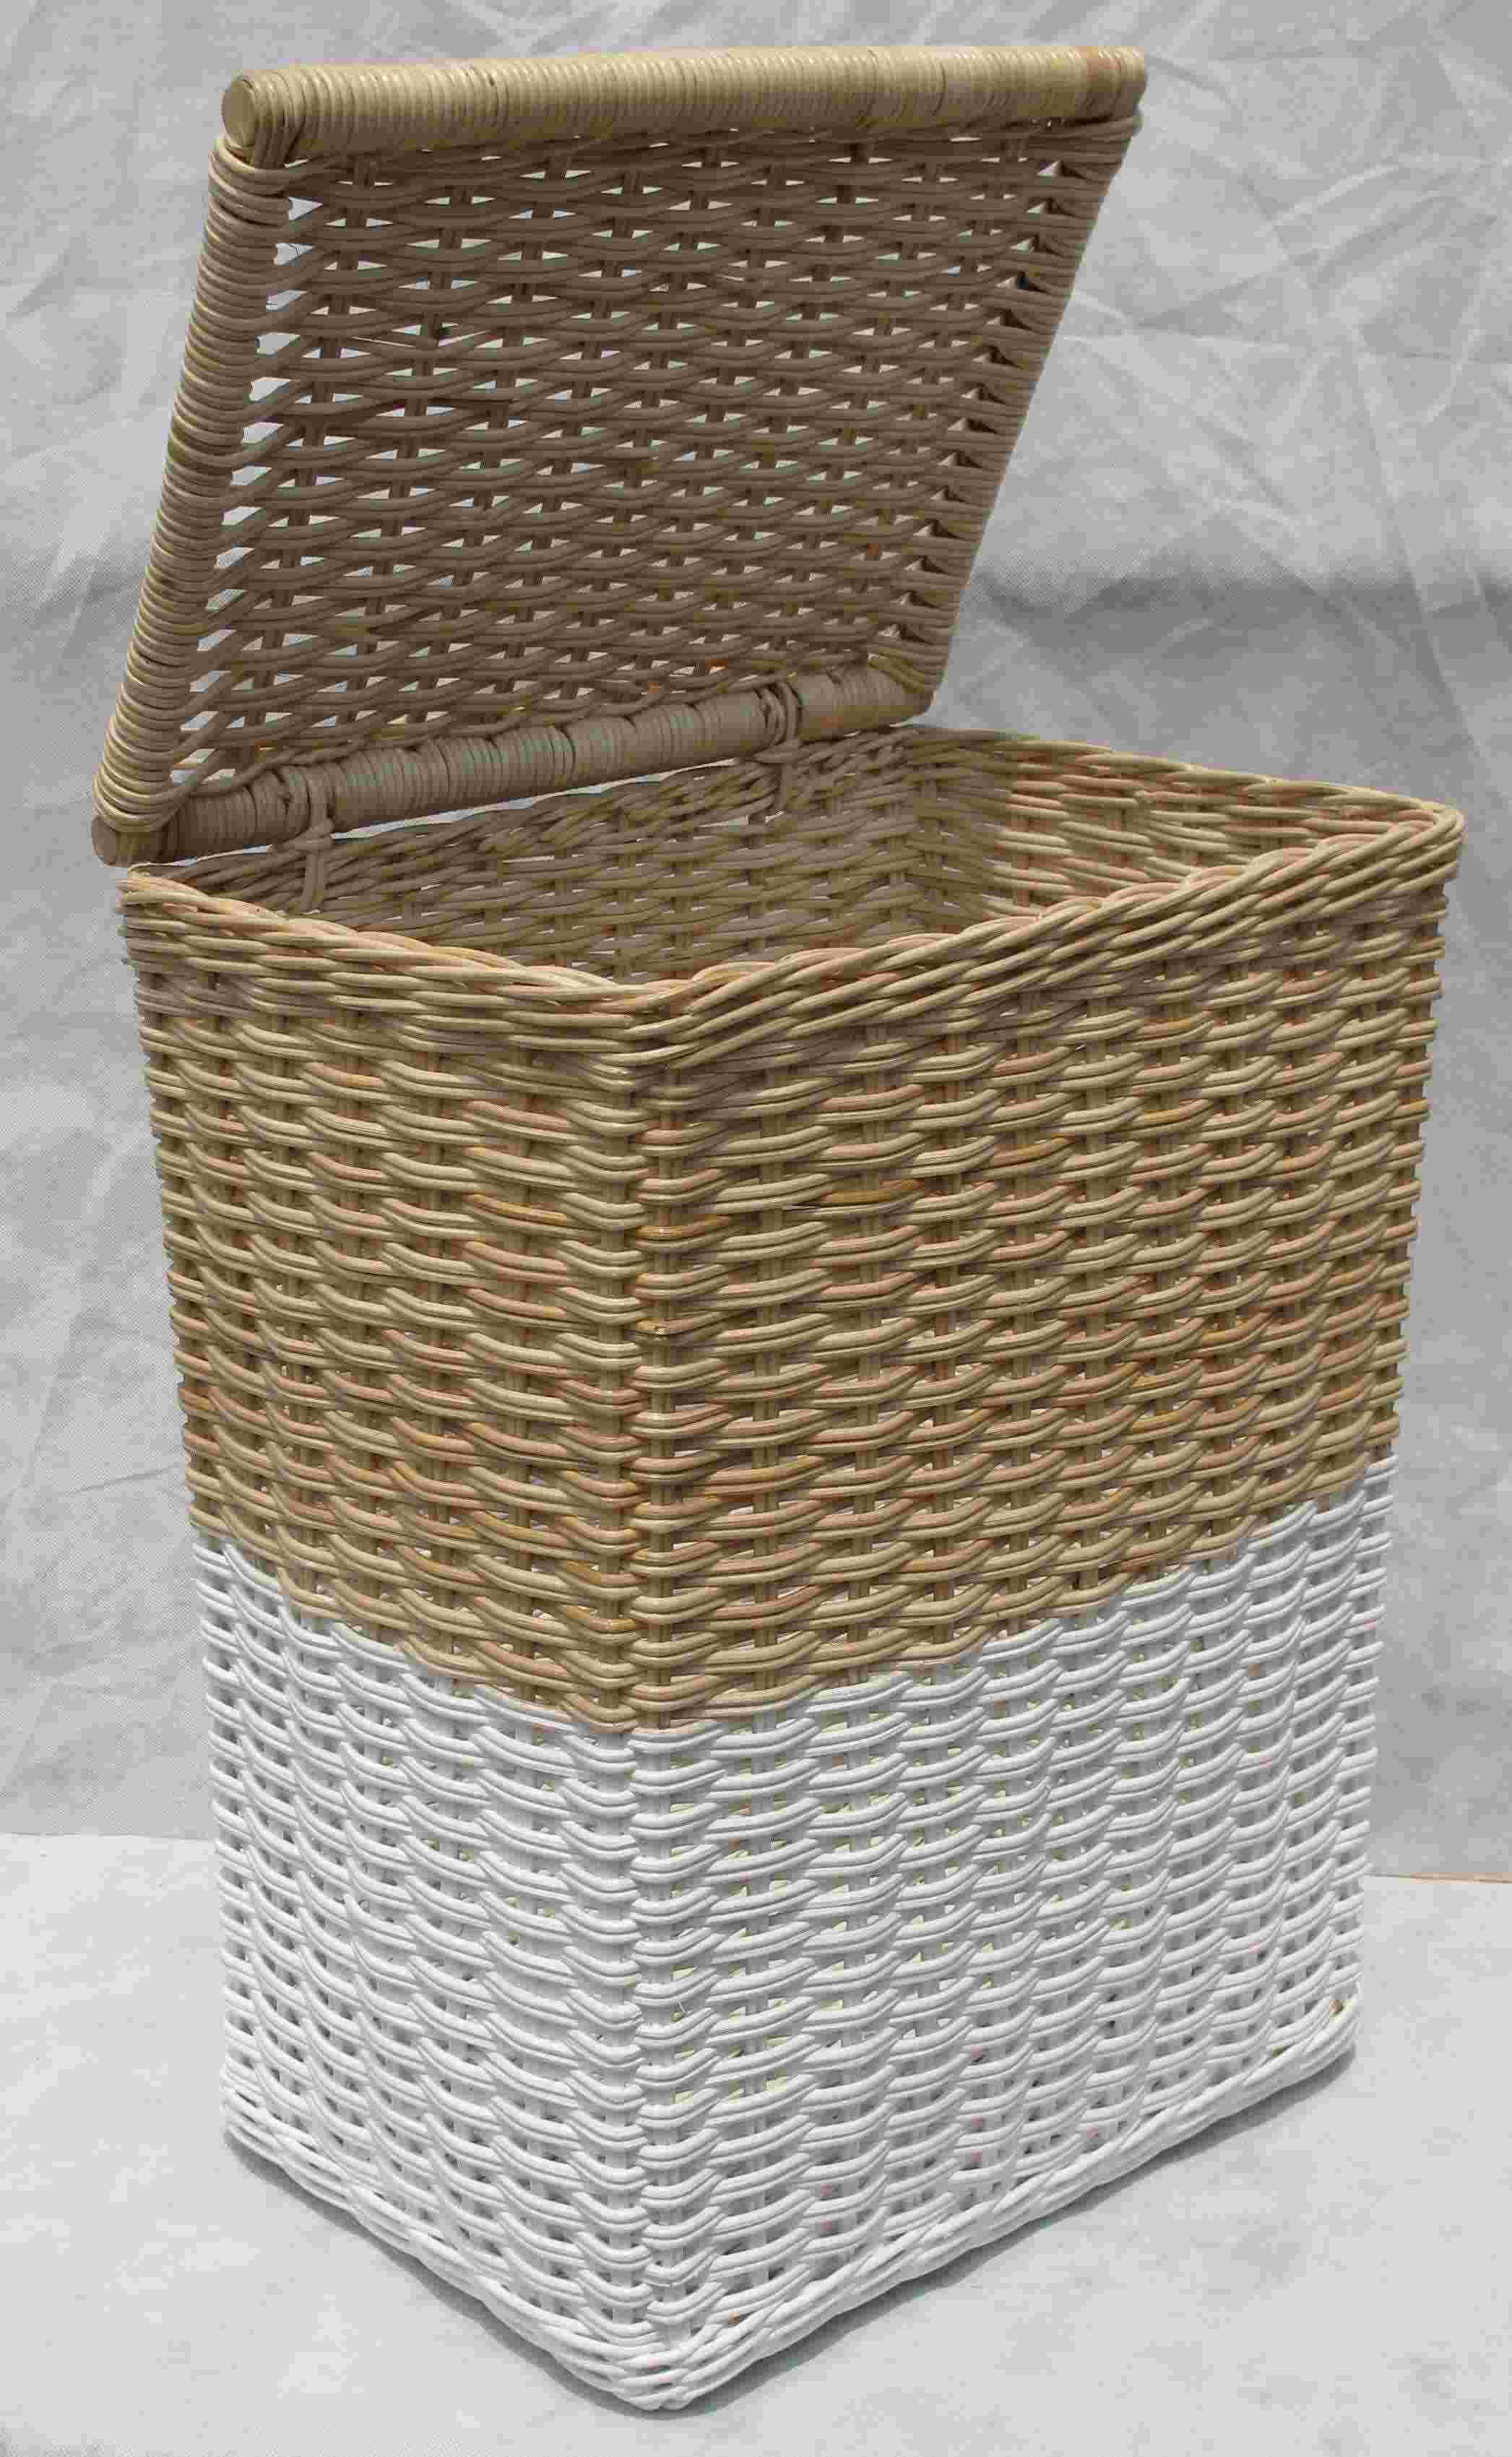 rattan wicker laundry baskets with lid